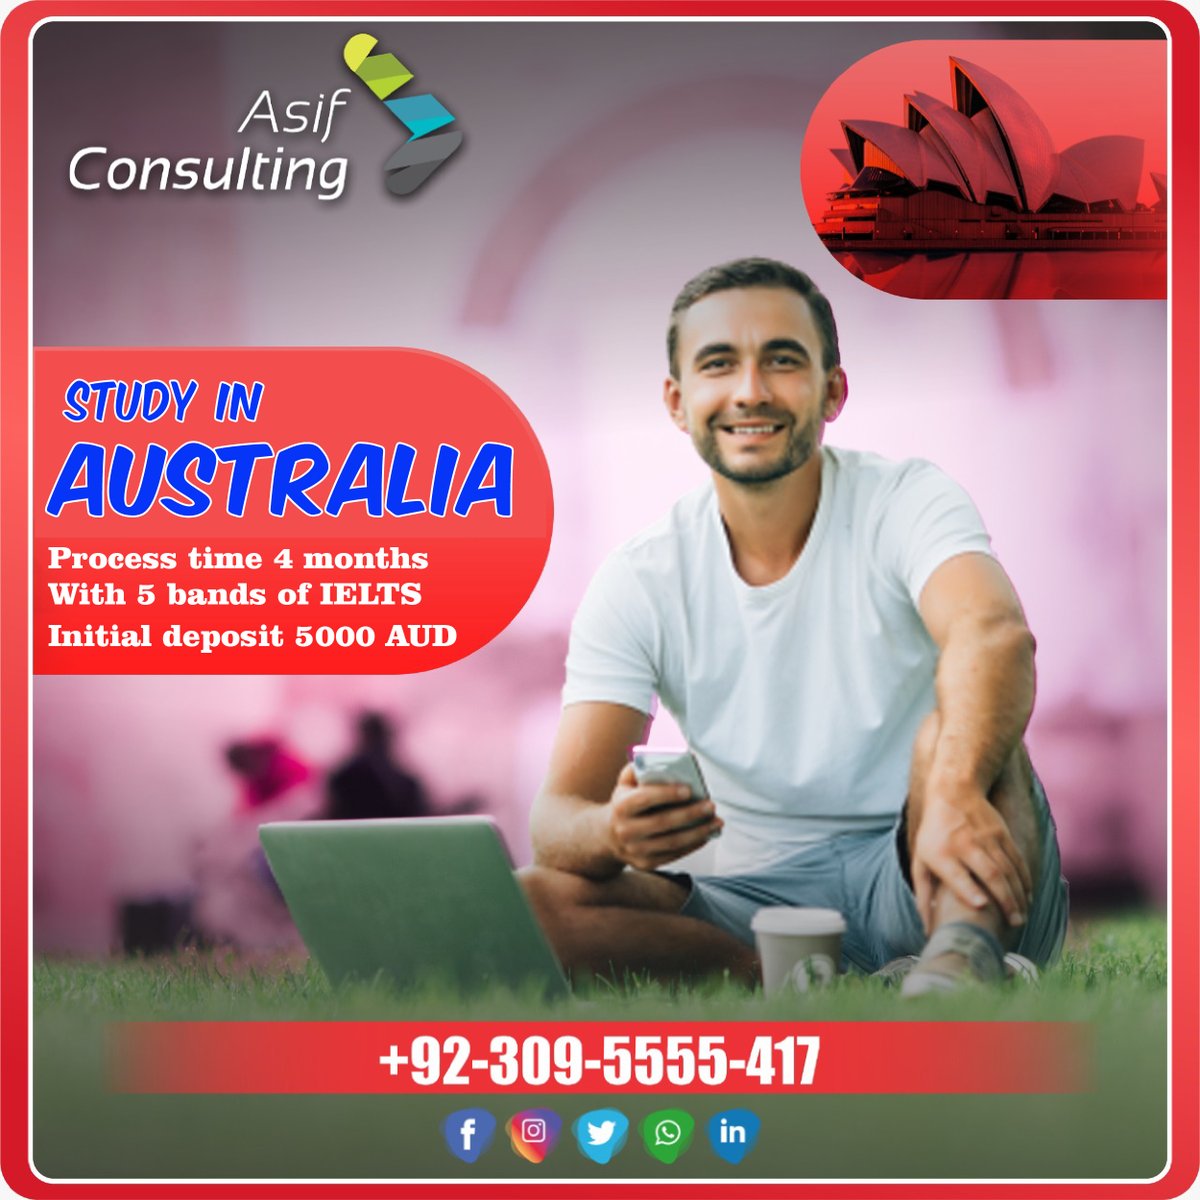 WANT TO STUDY IN AUSTRALIA
Make use of our professionals and shape your future
0309-5555417
study@asifconsulting.pk
asifconsulting.pk
youtube.com/channel/UCGLEy…
facebook.com/asifconsulting
#asifconsulting #australiacareer  #australianimmigration #australiastudy #studyvisaaustralia